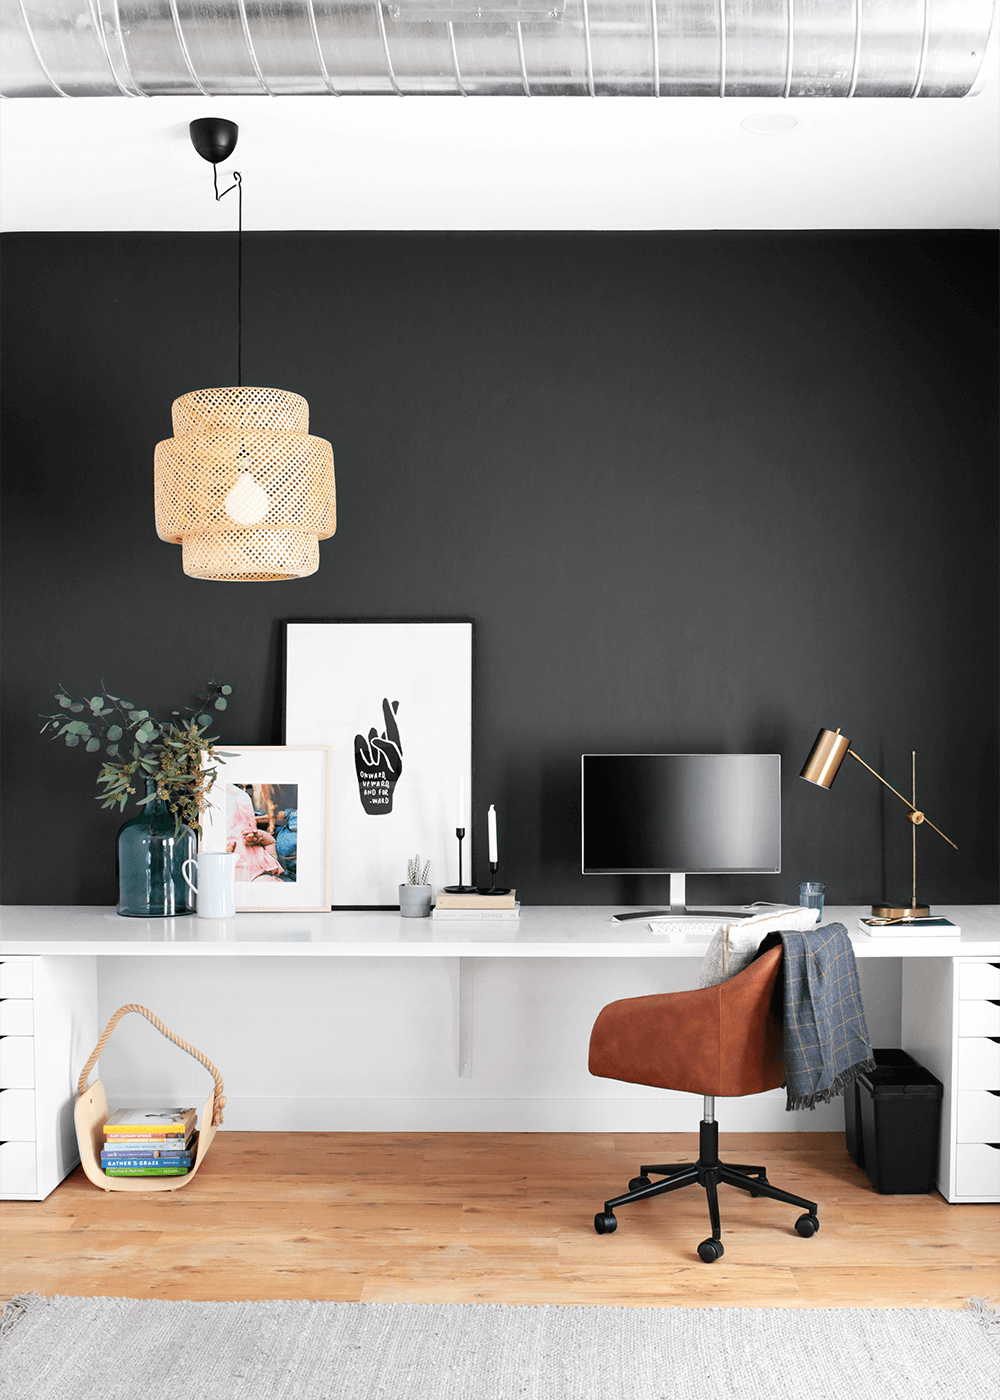 Dark and Sophisticated: Black Home Office Ideas You Will Love